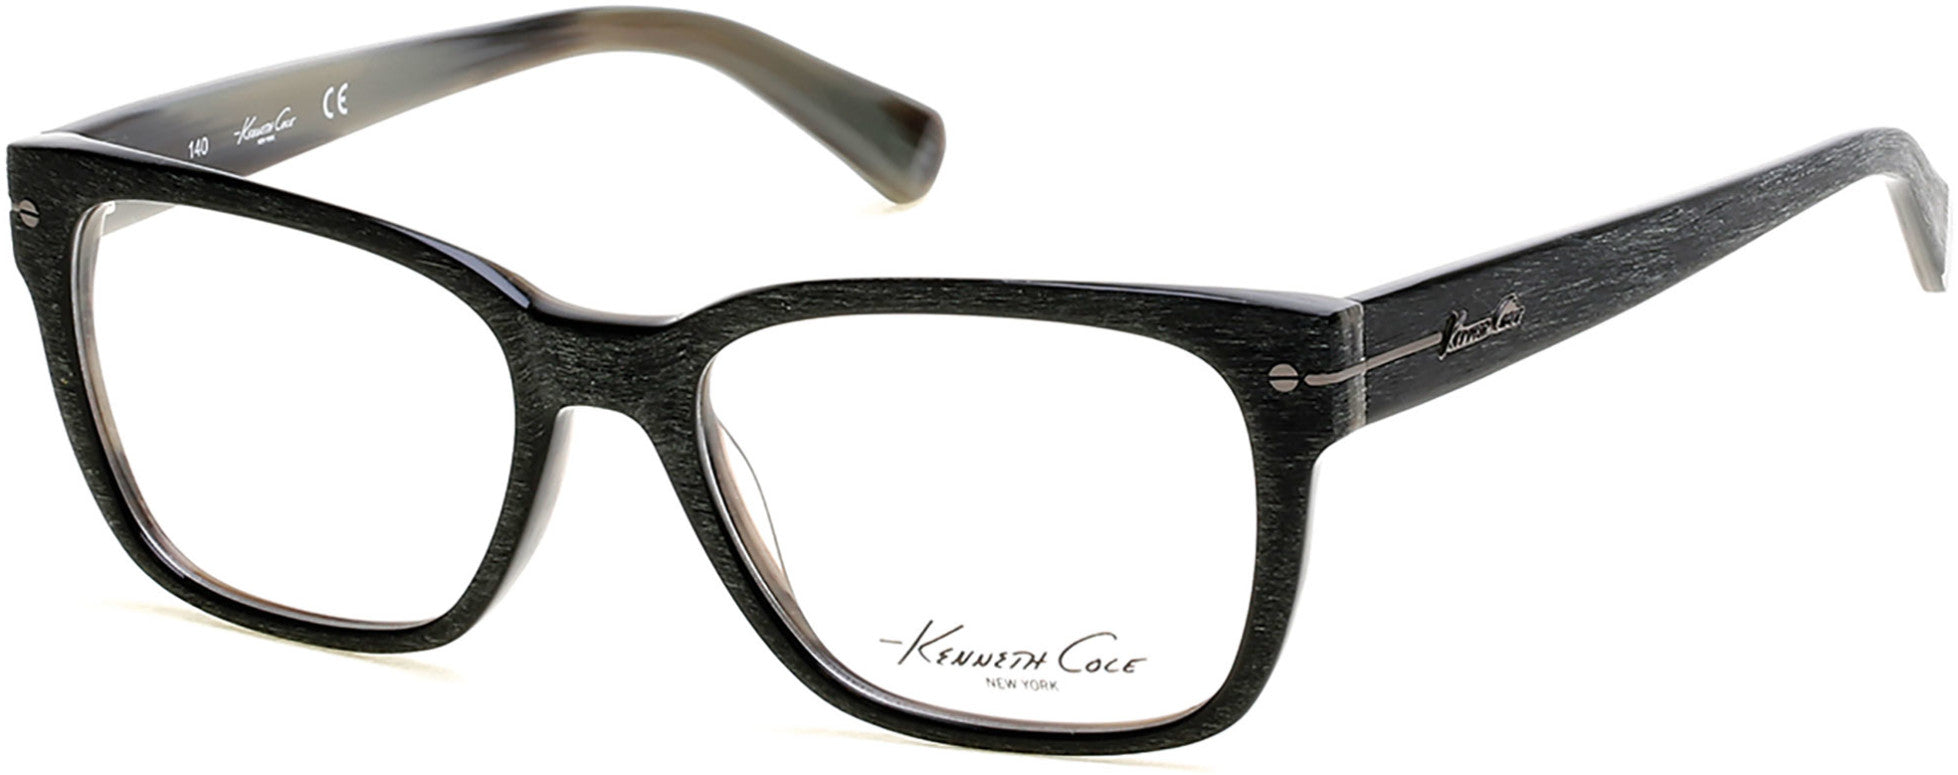 Kenneth Cole New York,Kenneth Cole Reaction KC0236 Eyeglasses 020-020 - Grey/other